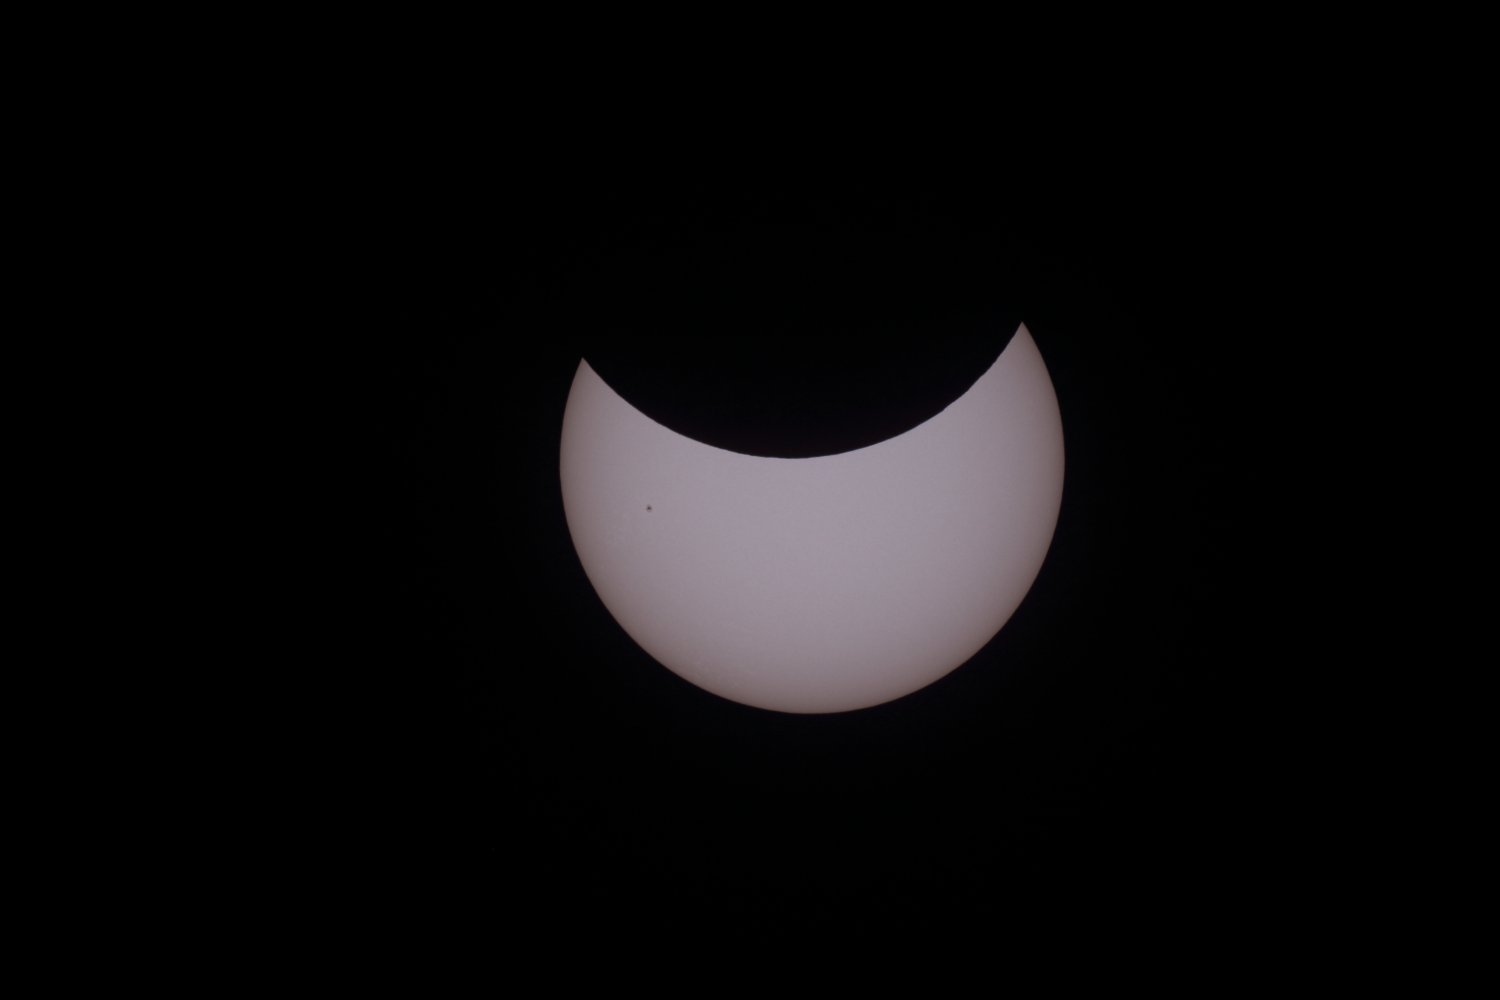 Partial eclipse 
photographed from Talmassons: 33 KB; click on the image to enlarge